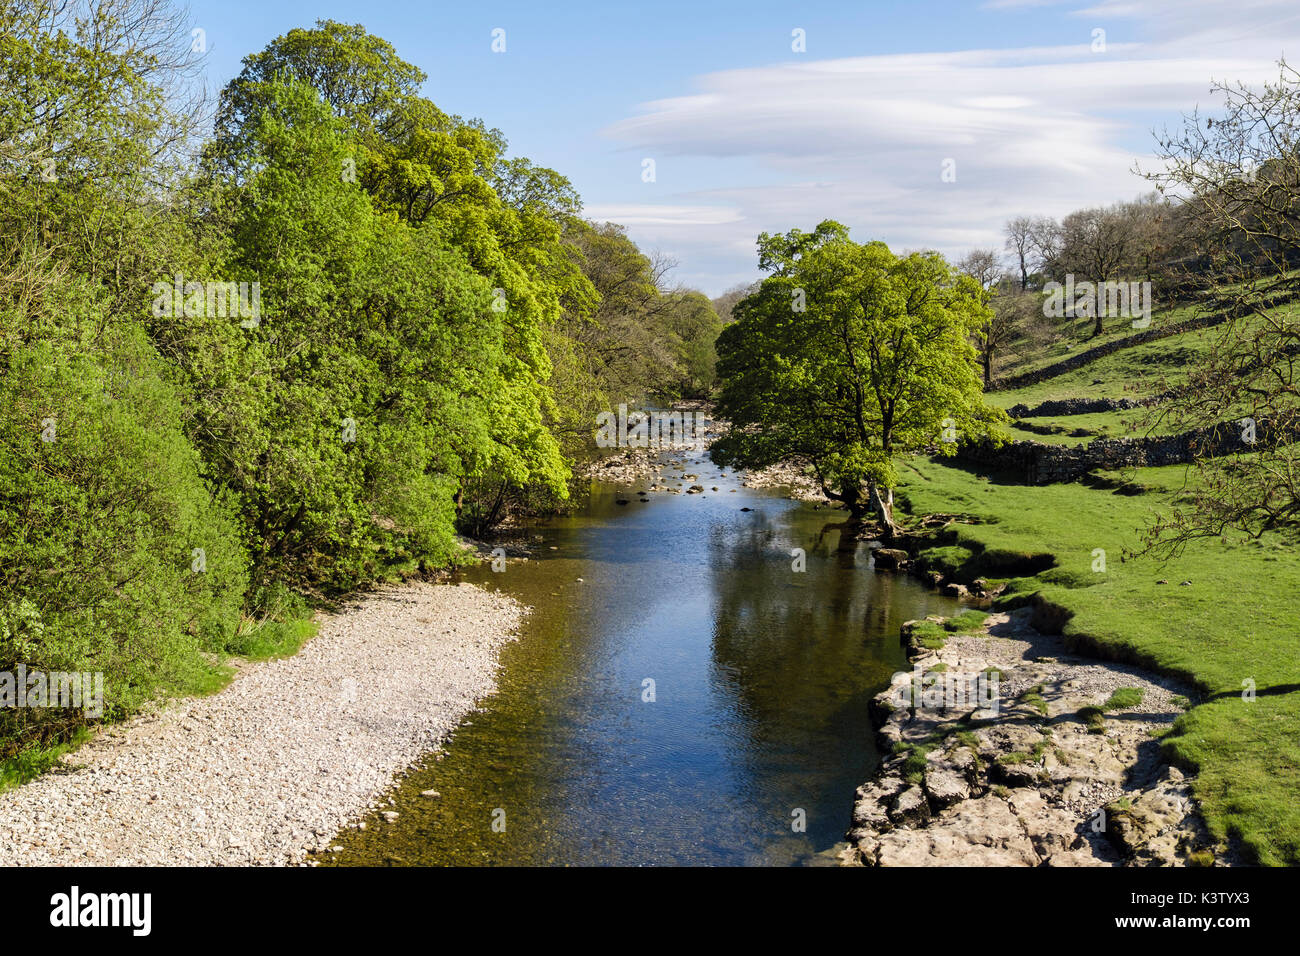 View along River Wharfe in Kettlewell, Upper Wharfedale, Yorkshire Dales National Park, North Yorkshire, England, UK, Britain Stock Photo